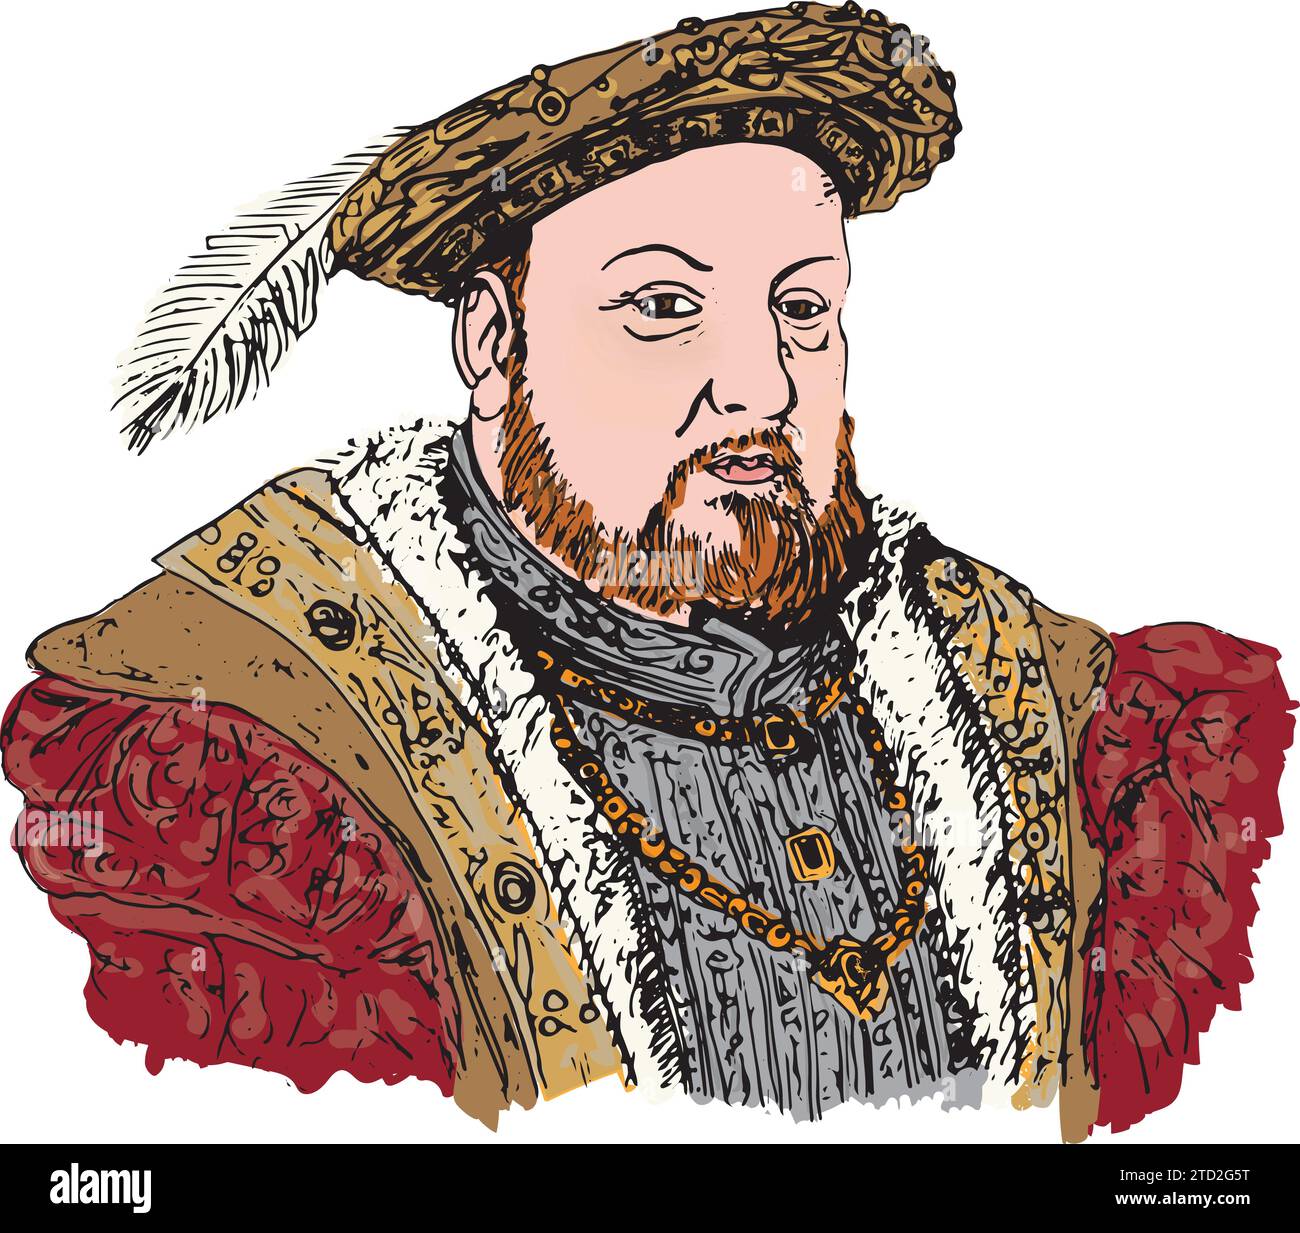 King Henry VIII of England with feathered hat and red coat, portrait Stock Vector